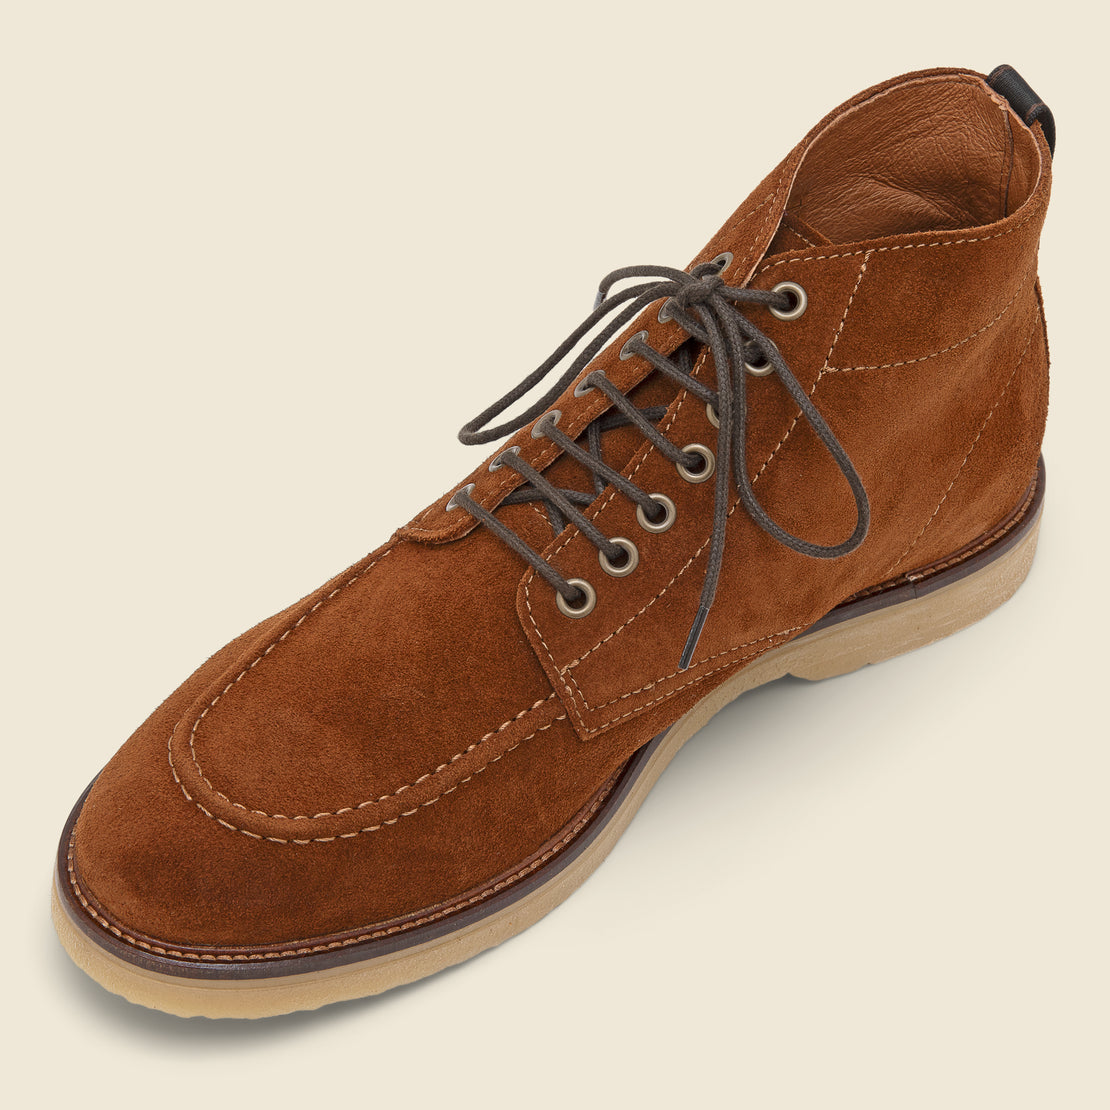 Kip Suede Apron Boot - Tan - Shoe the Bear - STAG Provisions - Shoes - Boots / Chukkas